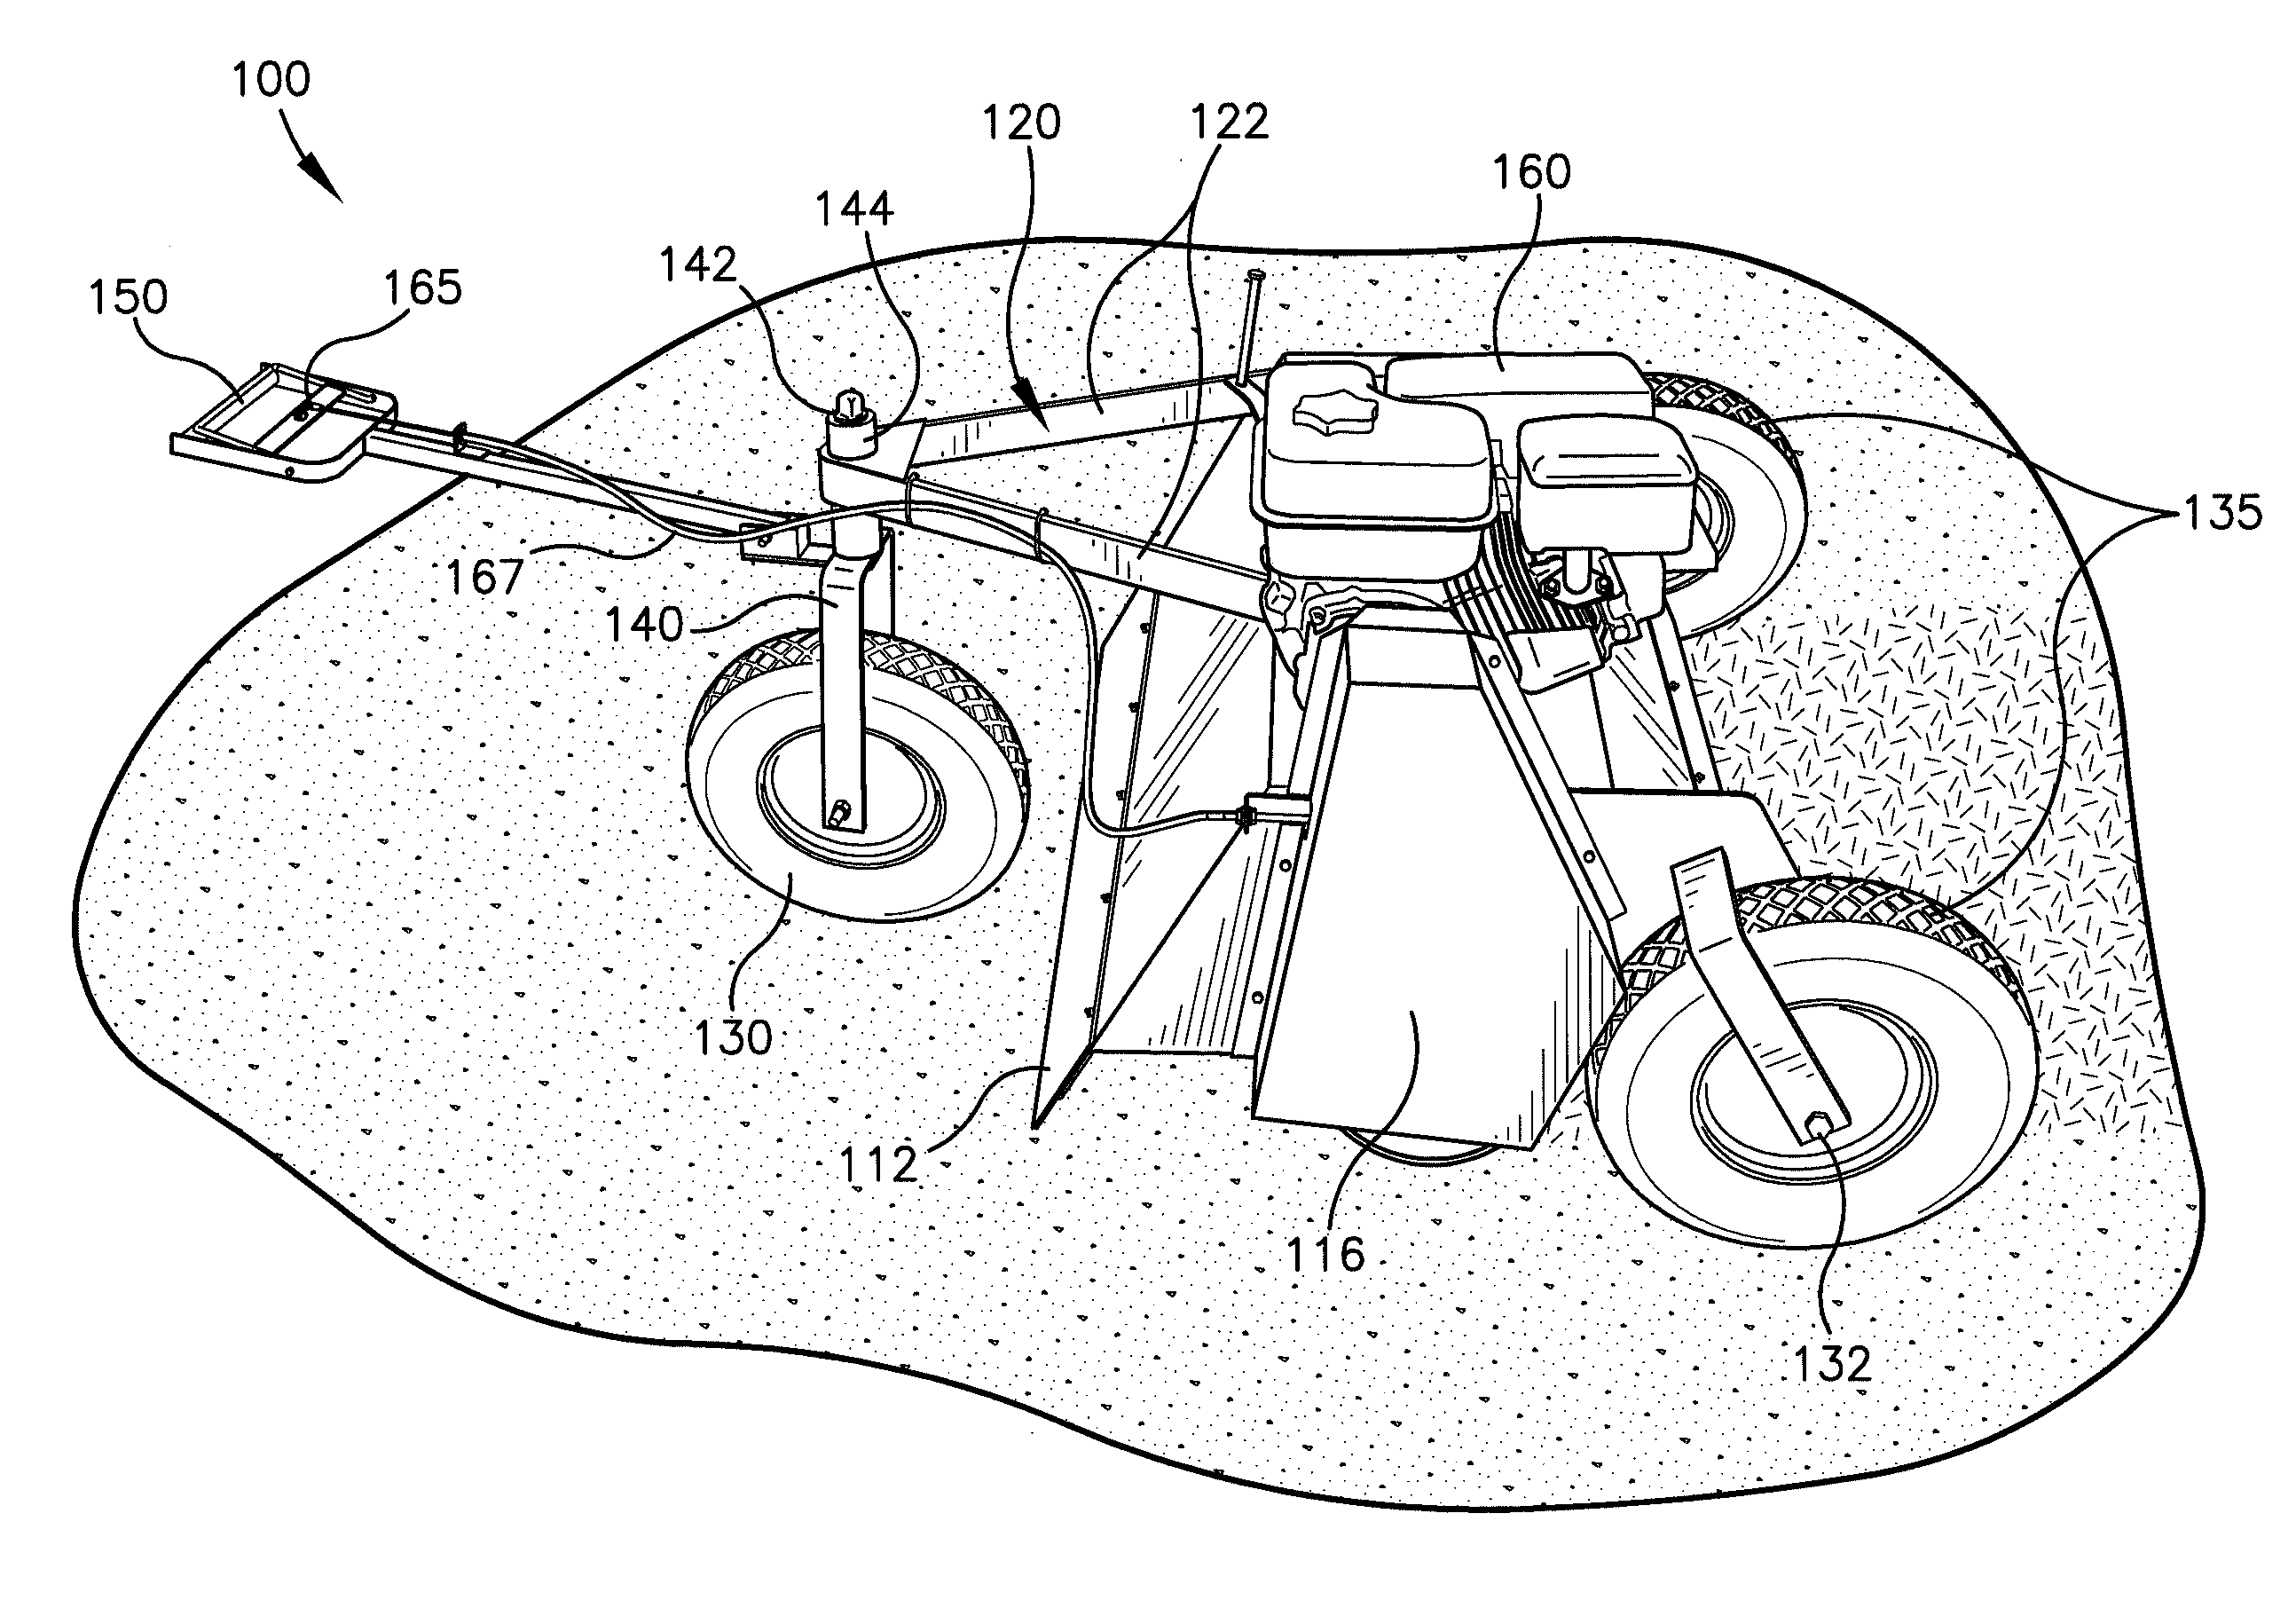 Poultry litter management device and method